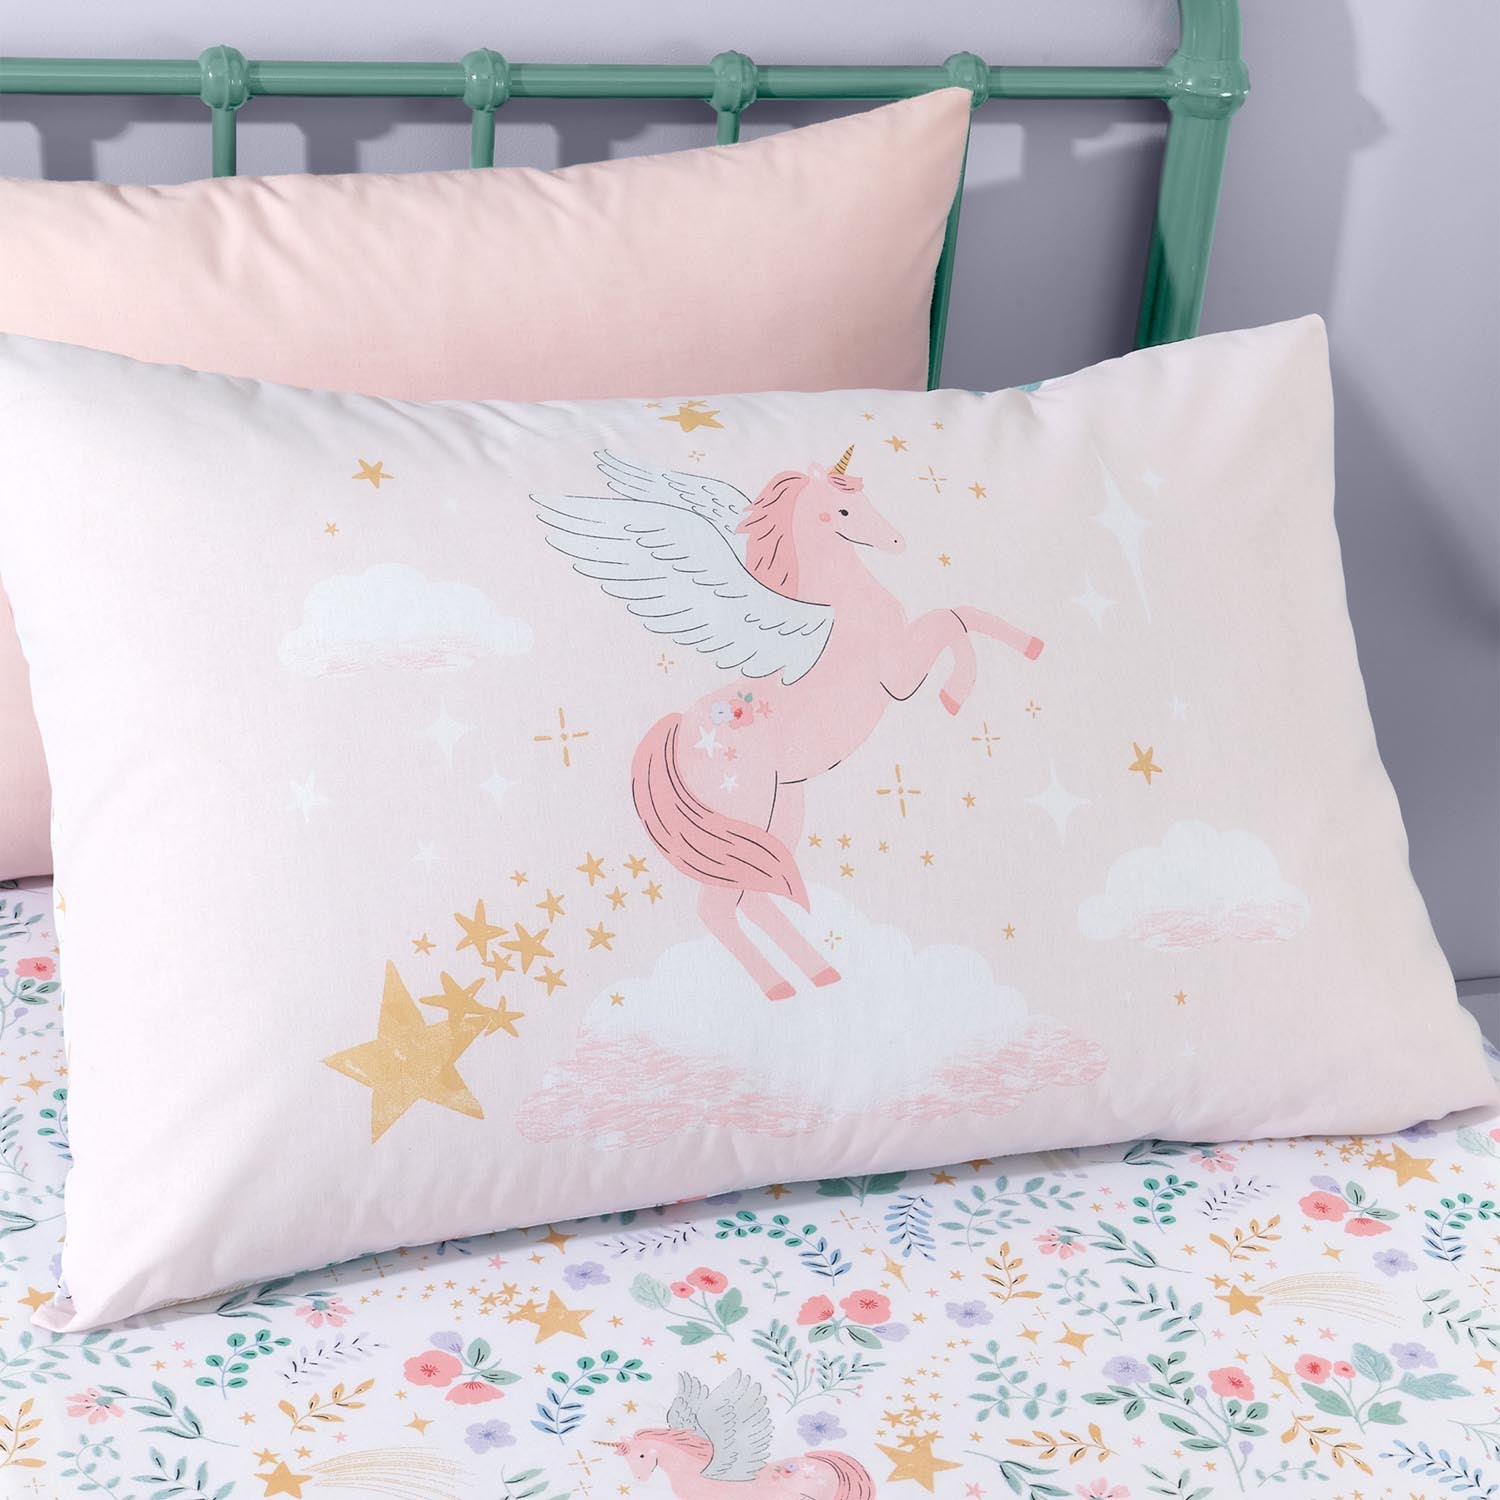 The Home Luxury Collection Magical Unicorn Duvet Cover Set 4 Shaws Department Stores